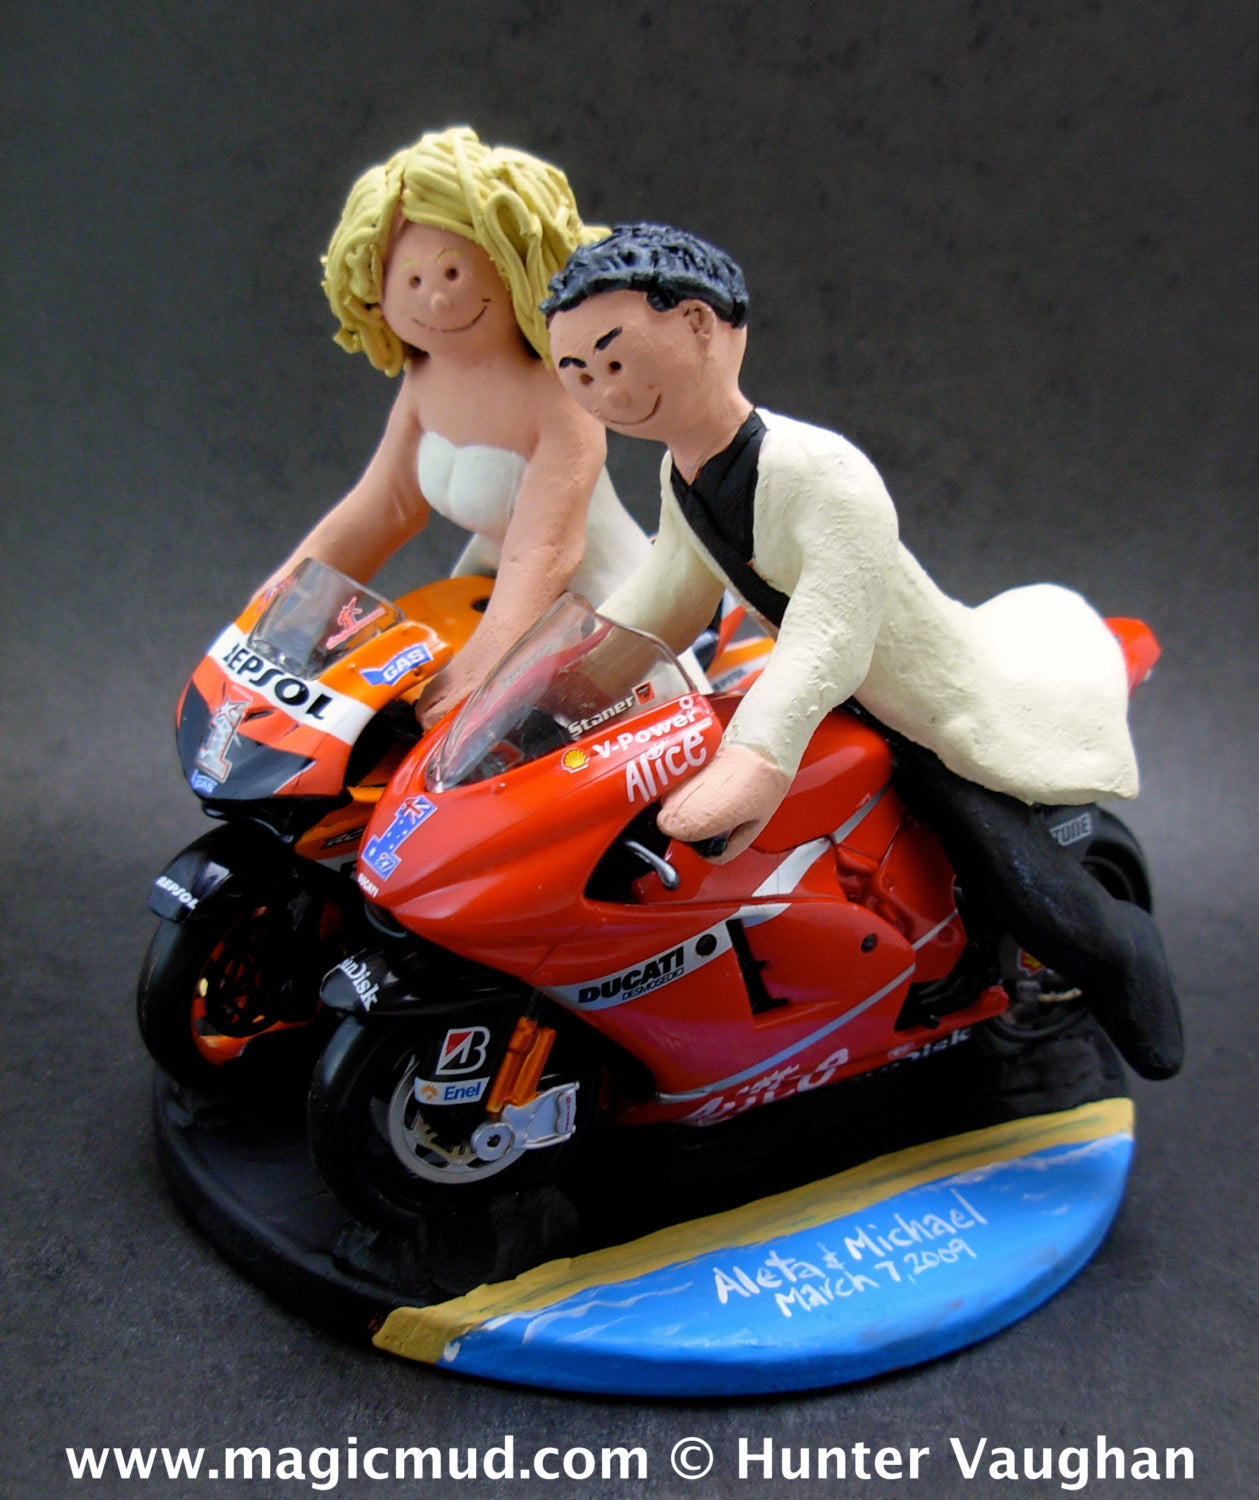 Sportbike Motorcycle for Bride and Groom Wedding Cake Topper,  Motorcycle Wedding Cake Topper, Motorcycle Riders Wedding Cake Topper - iWeddingCakeToppers